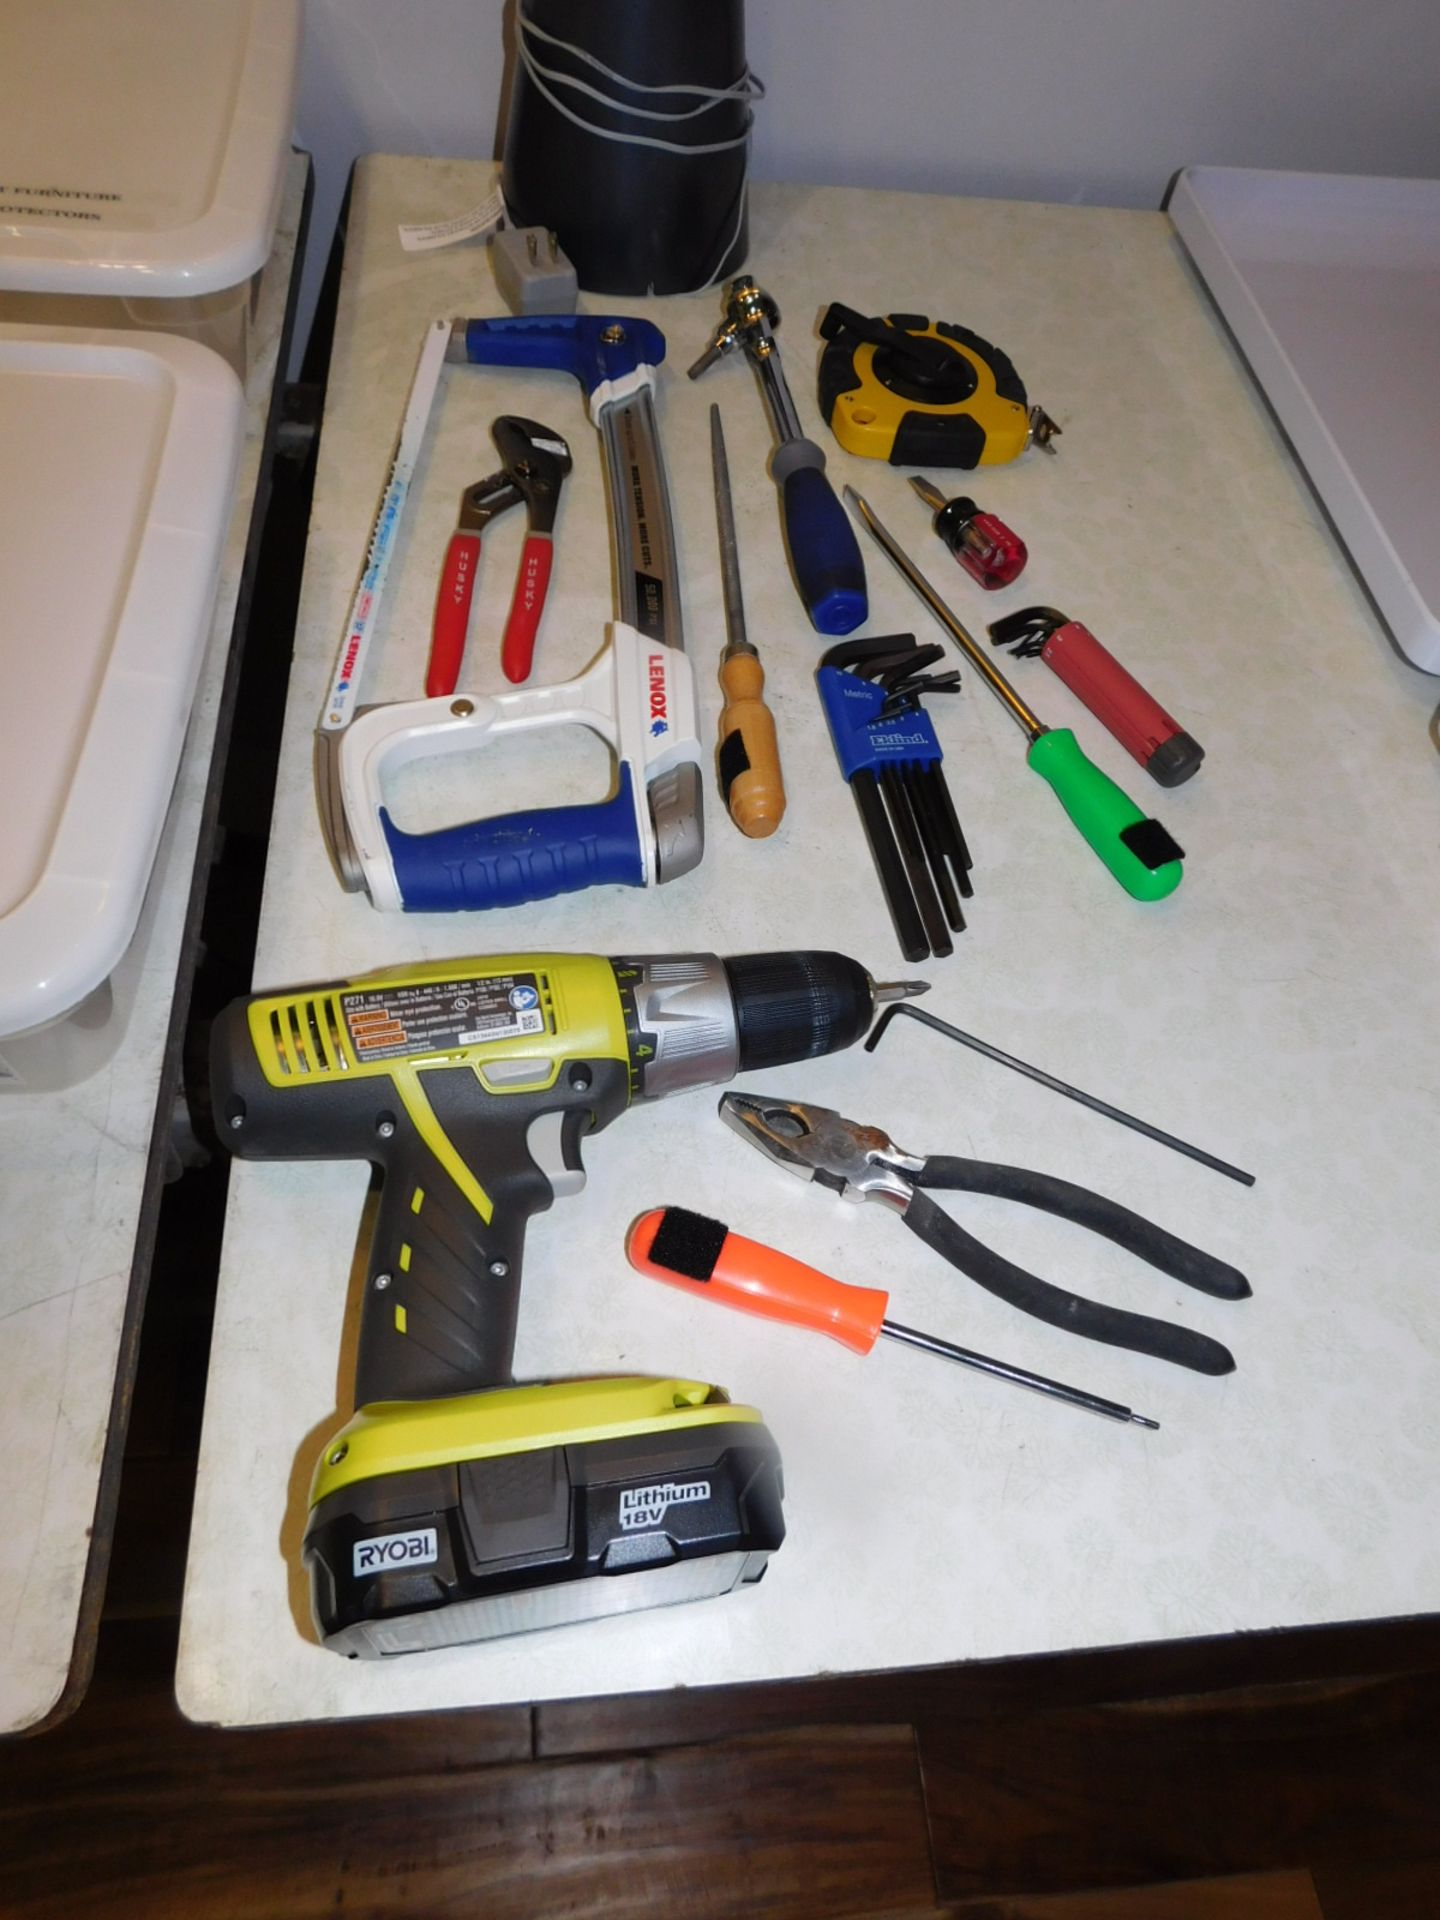 ASSORTMENT OF HAND TOOLS, TAPES, RYOBI DRILL WITH CHARGER, SOME TOOLS MAY BE GONE, OTHERS ADDED